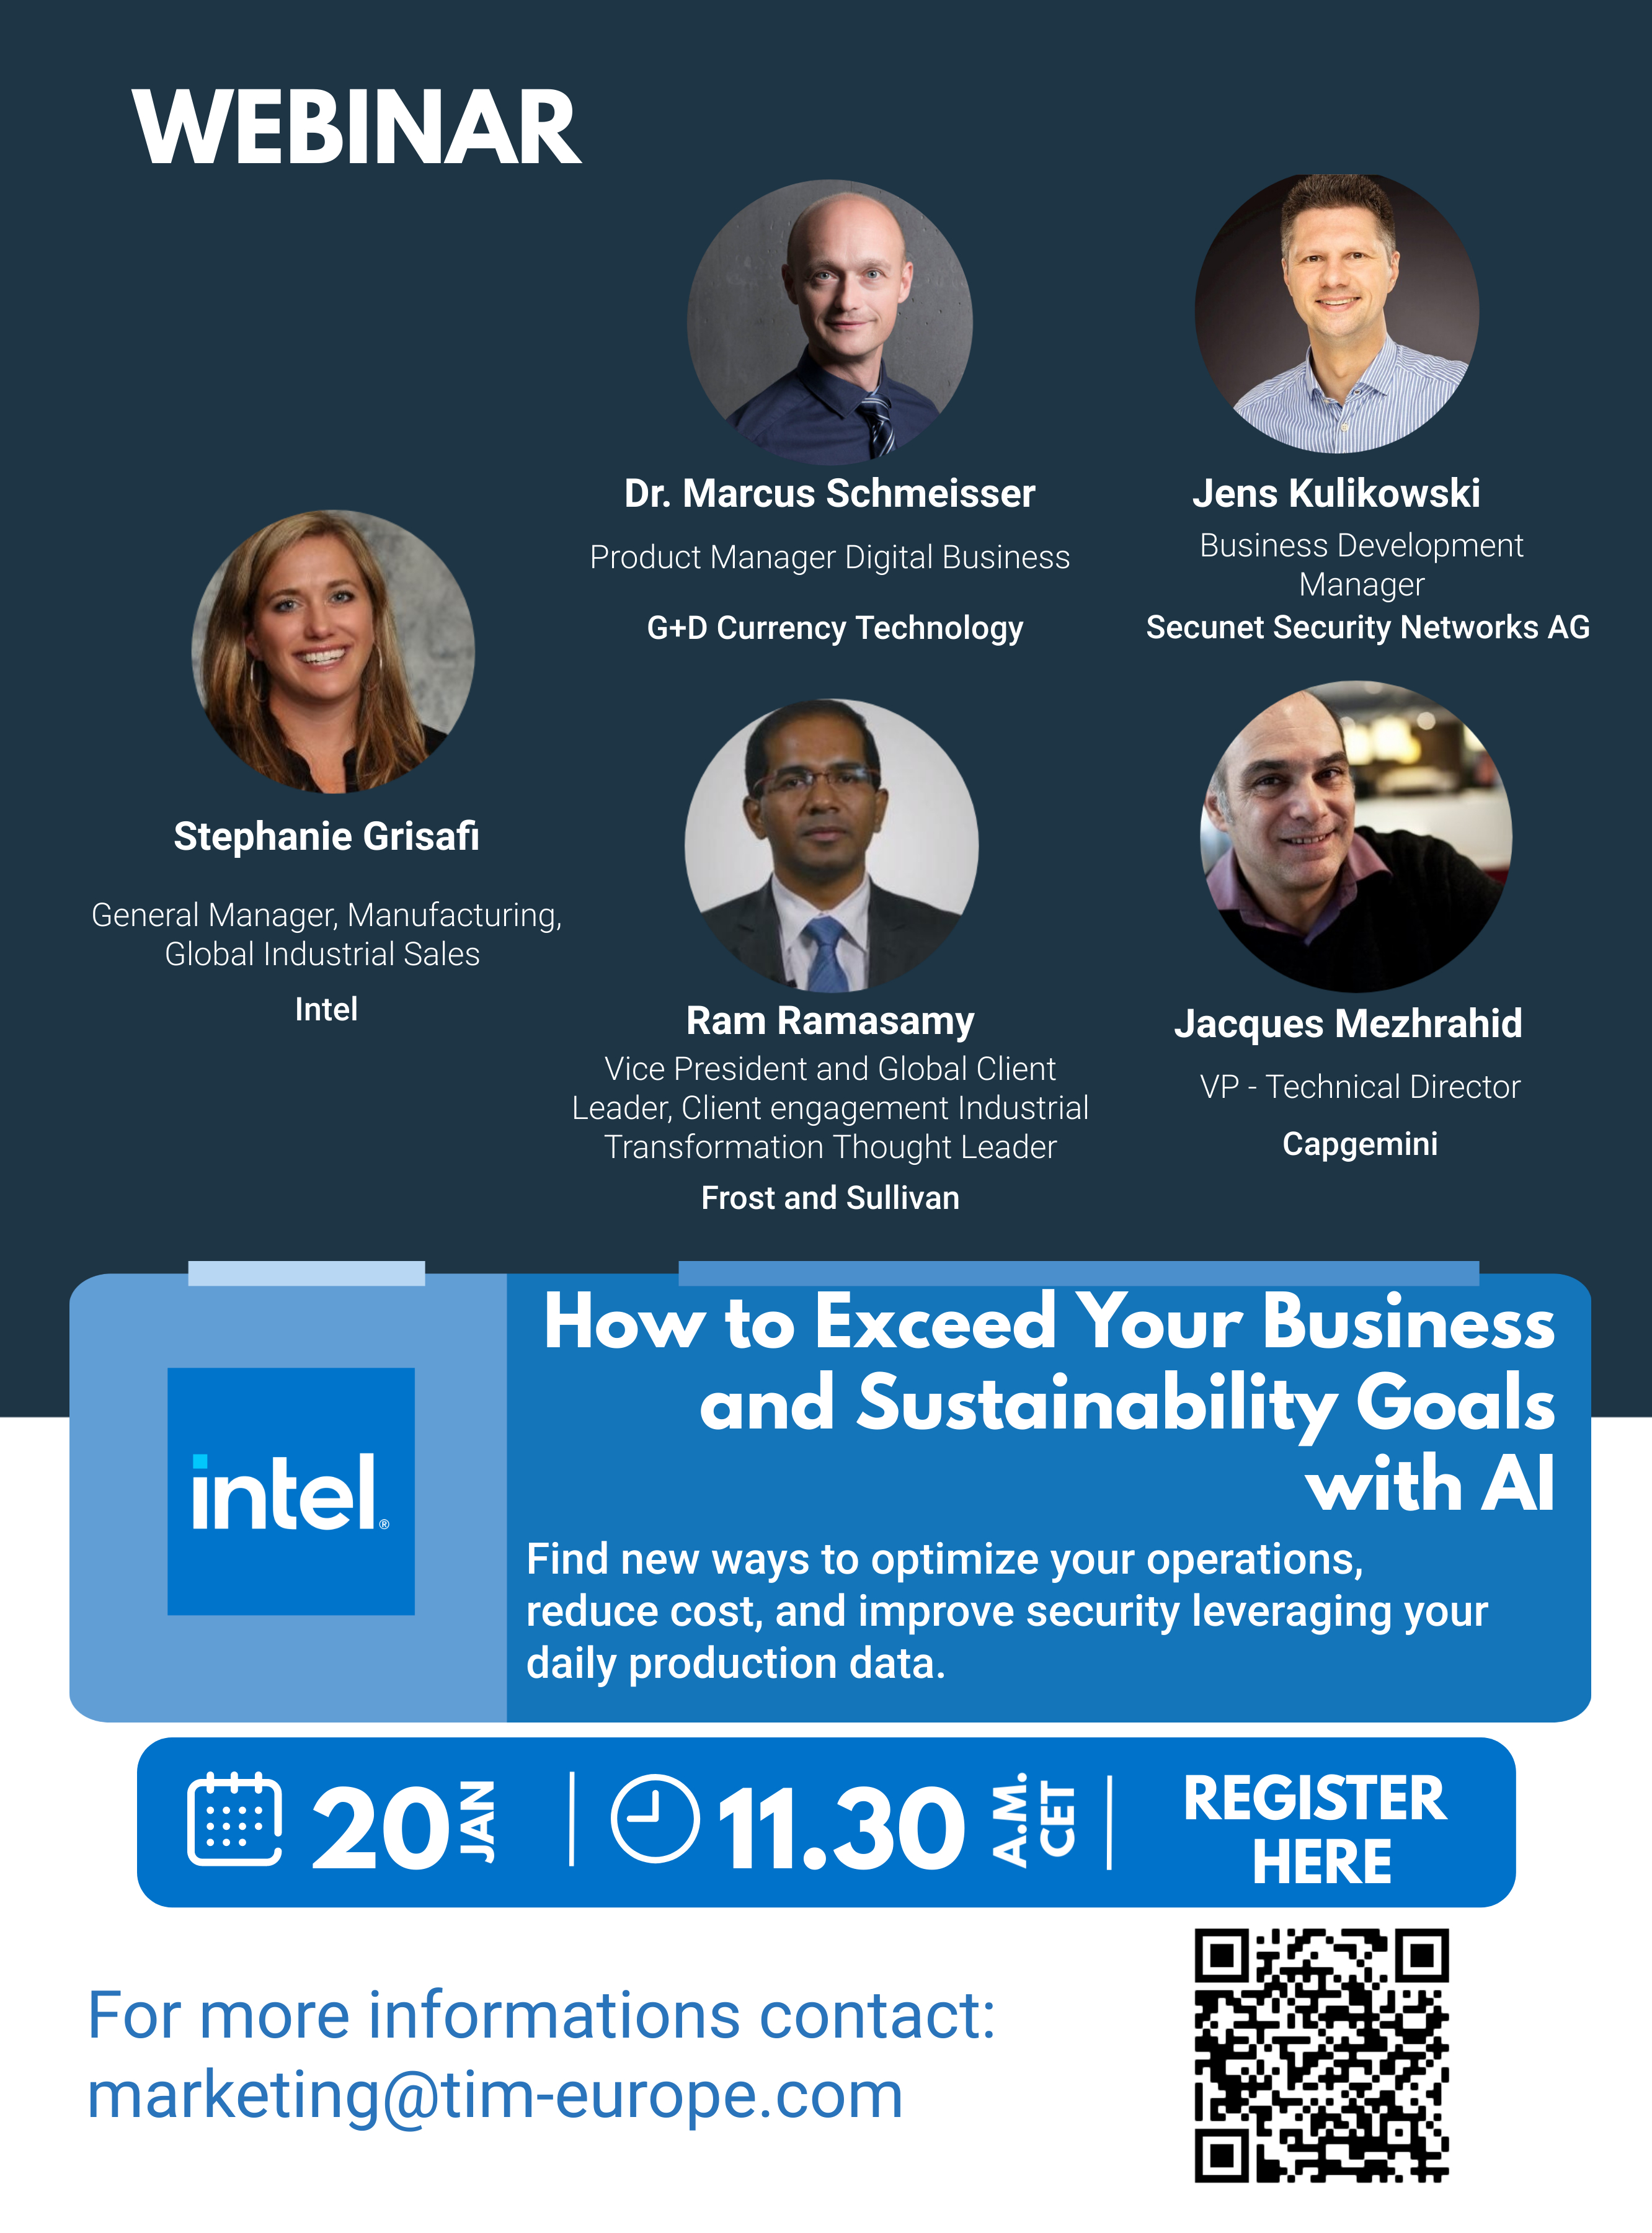 Webinar: How to Exceed Your Business and Sustainability Goals with AI